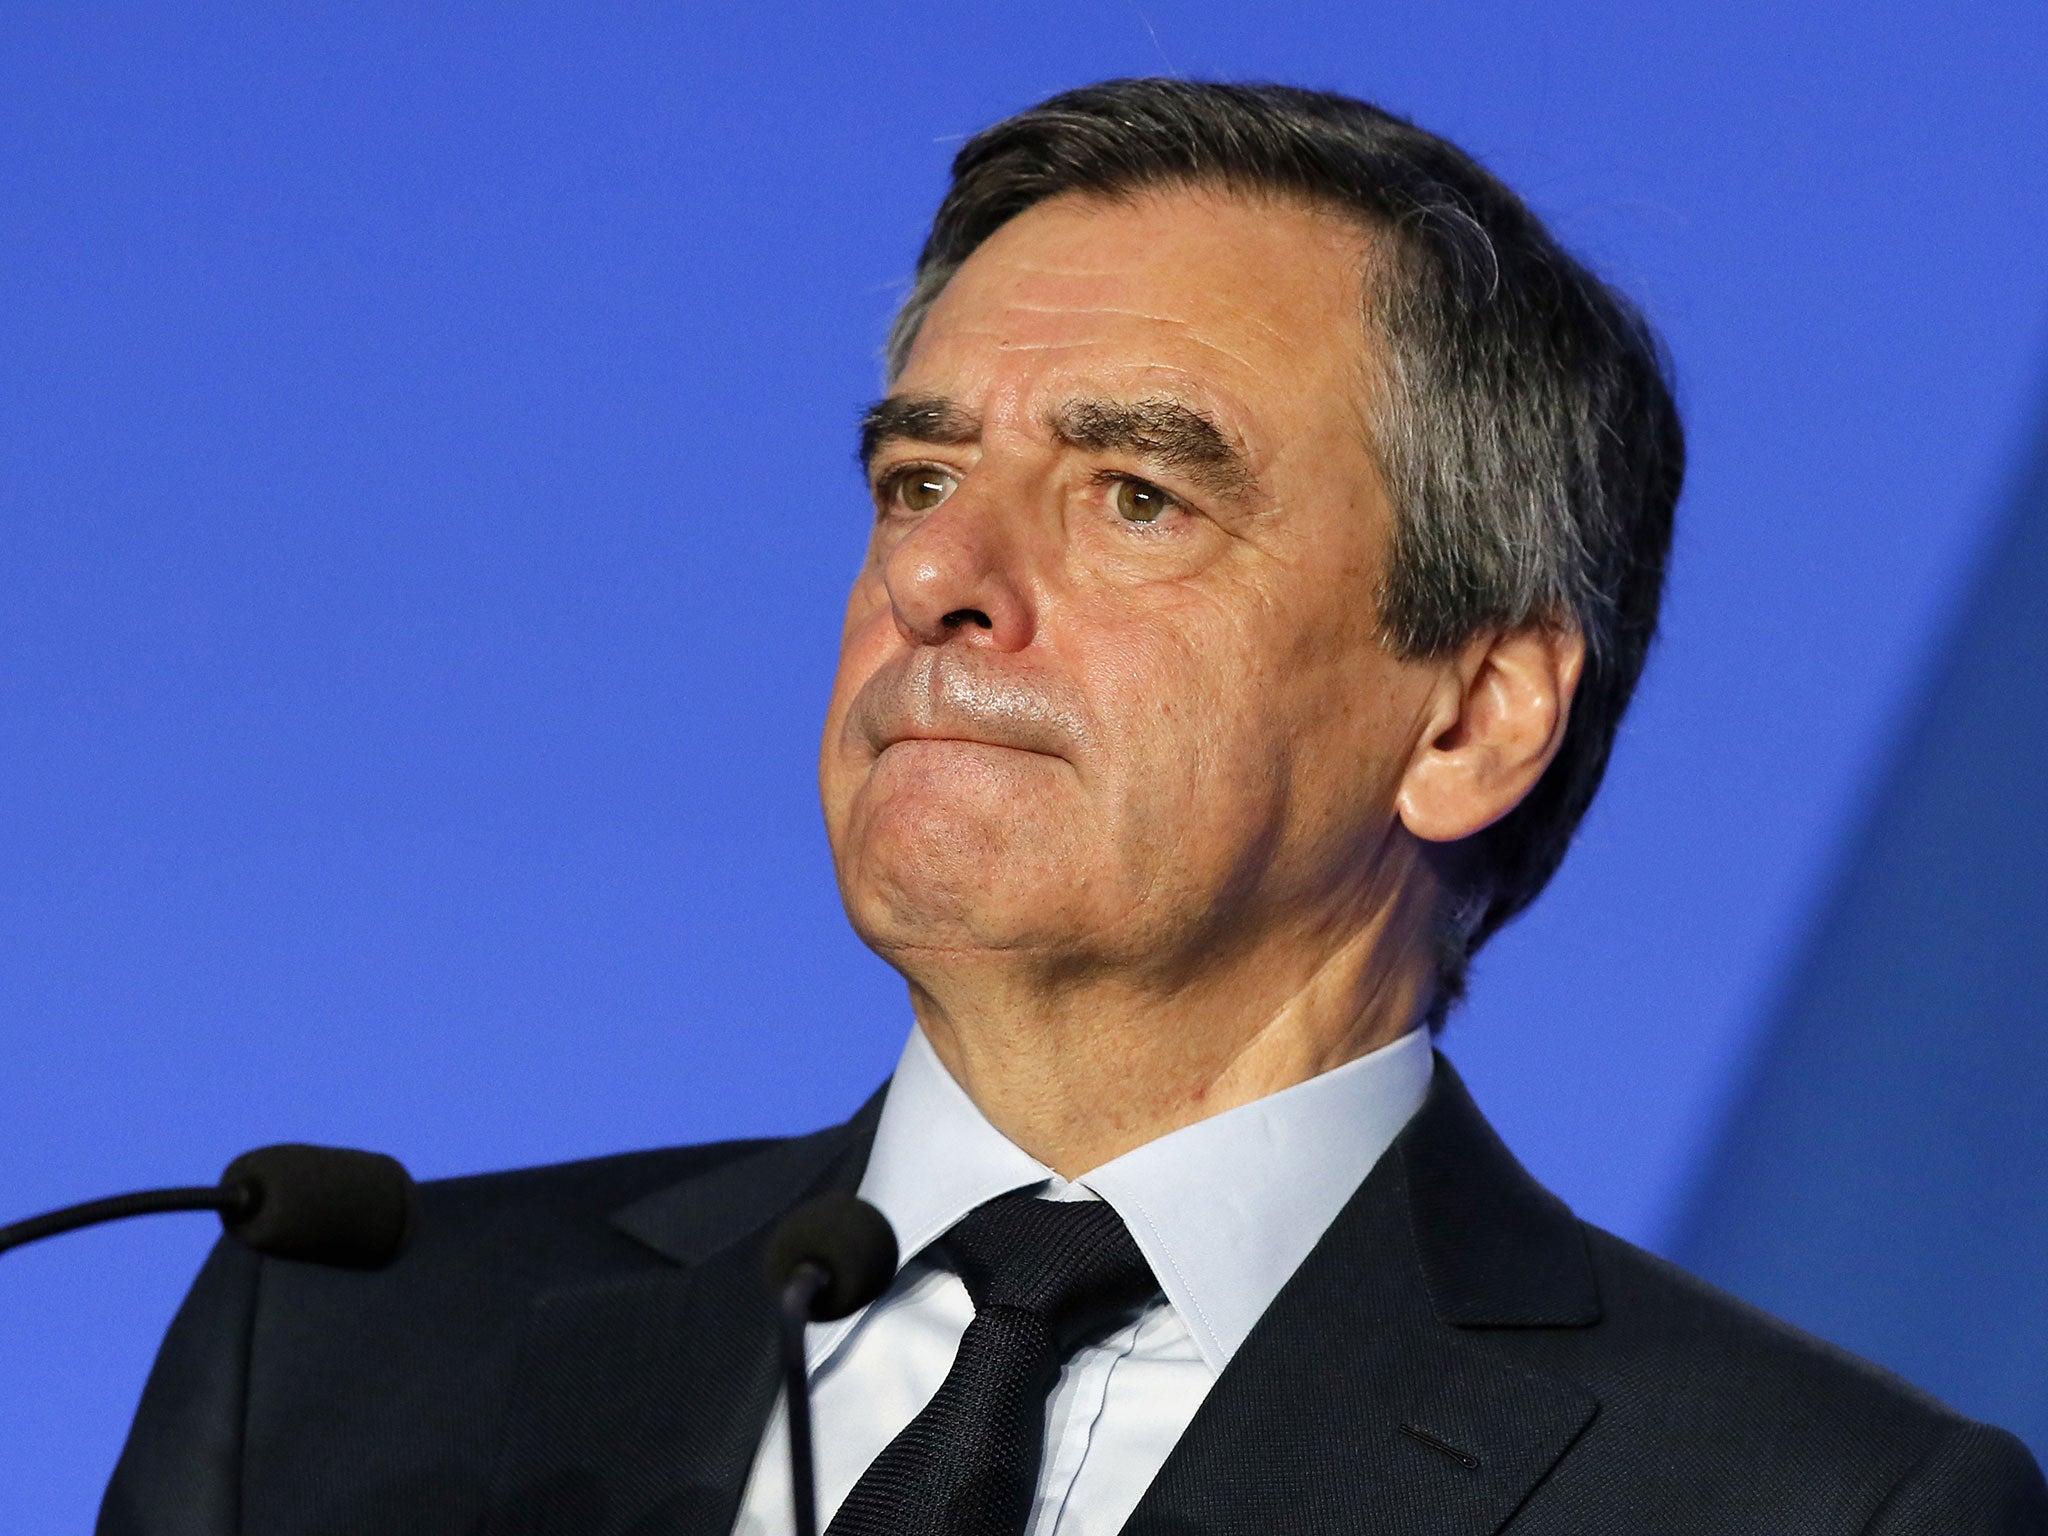 Francois Fillon endorsed Emmanuel Macron ahead of the final round of the election